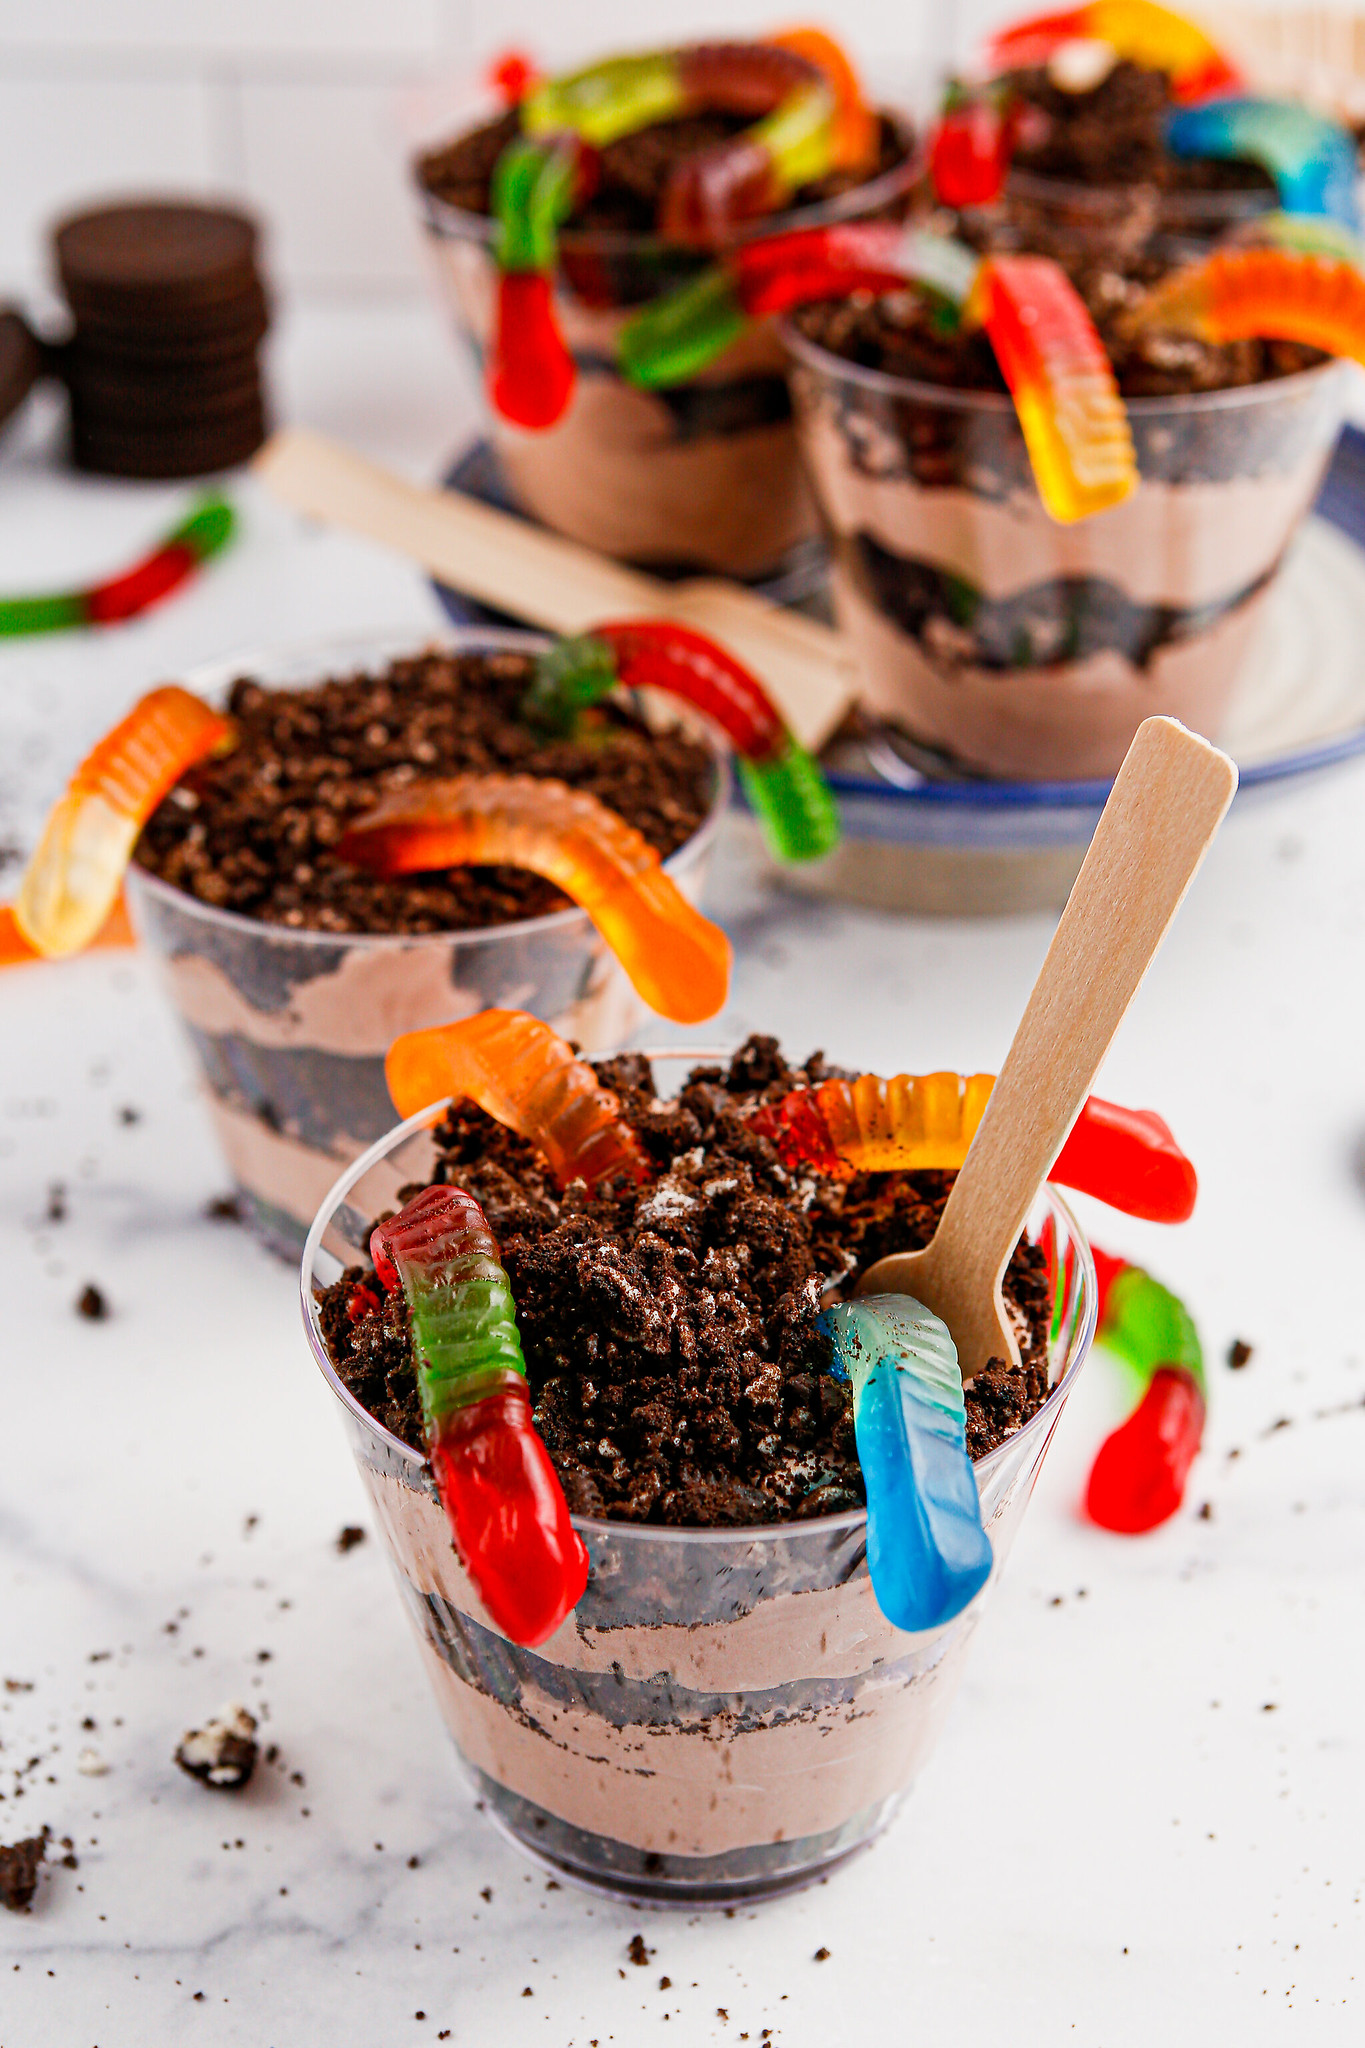 Dirt and Worms Pudding Cups are a fun and delicious treat for kids of all ages! These individual dessert cups are filled with creamy chocolate pudding, crunchy Oreo crumbs, and gummy worms for a playful twist on a classic dessert. Perfect for birthday parties or just a fun snack!